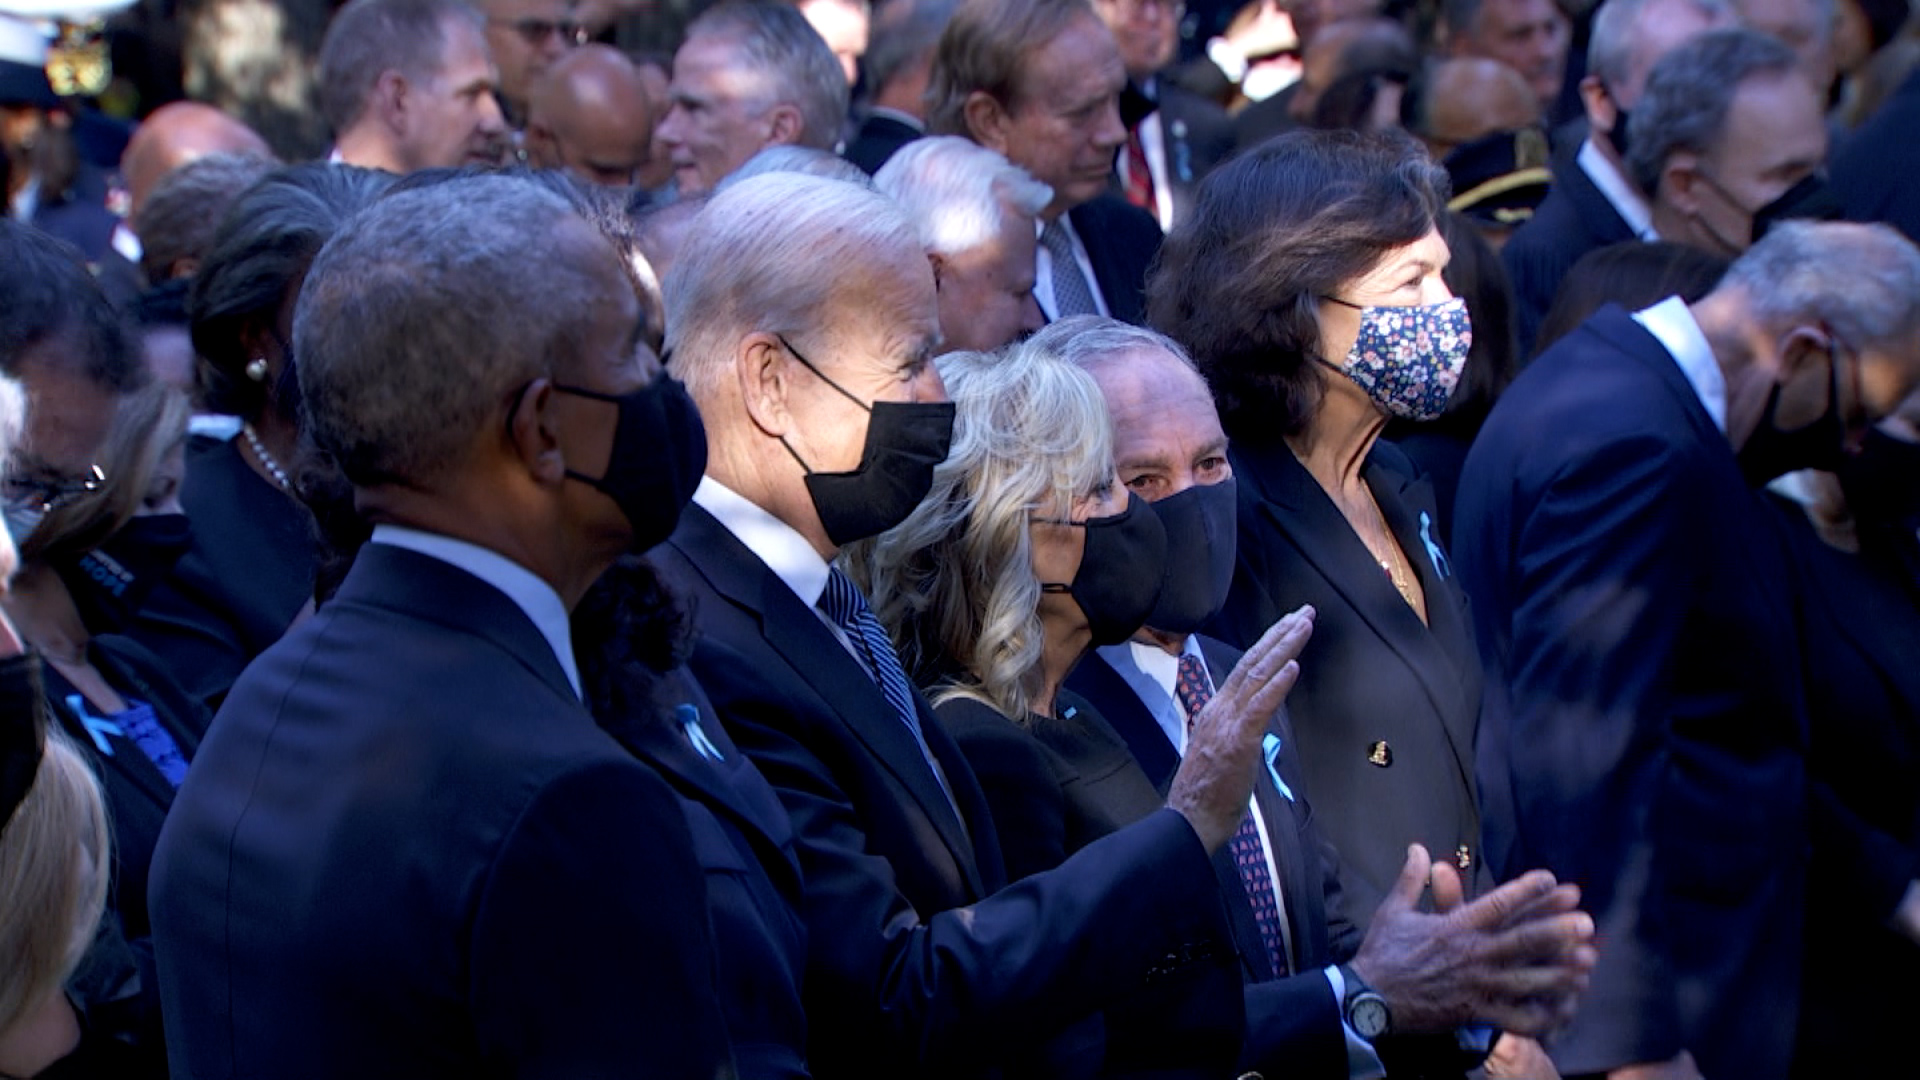 Biden and the first lady are joined by the Obamas and the Clintons for a tribute in New York as the US marks the anniversary of 9/11